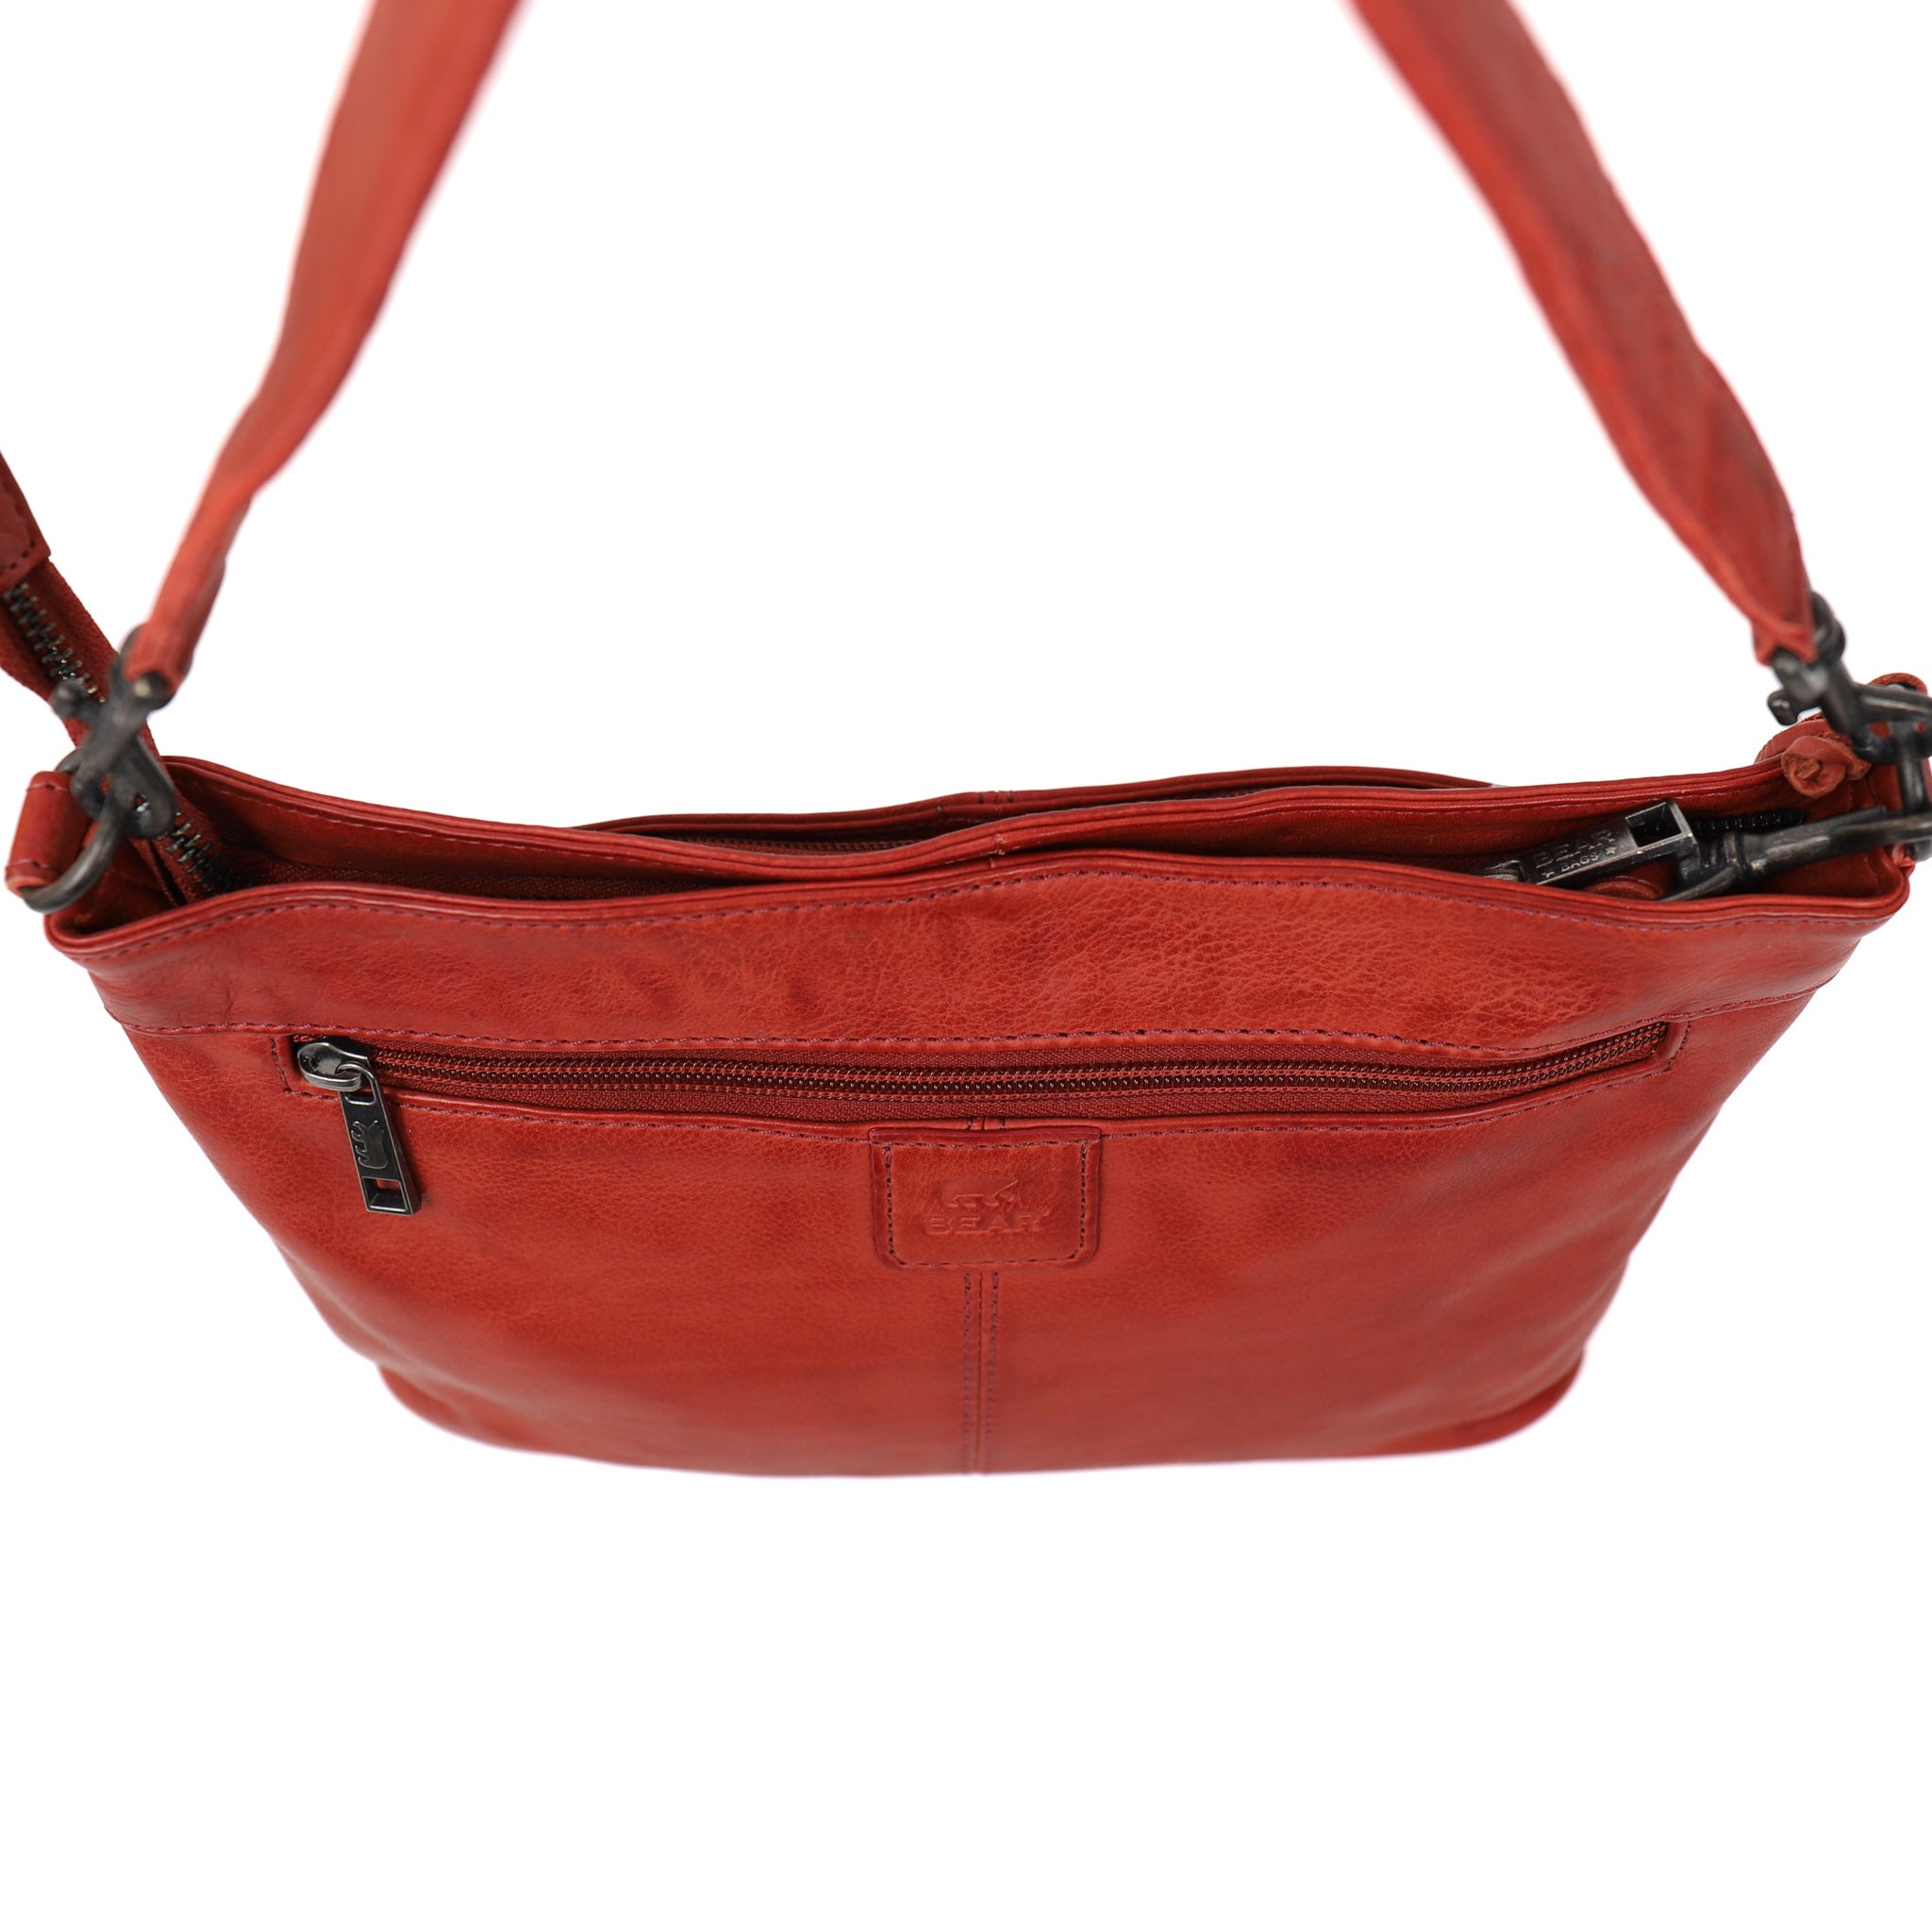 Hand/shoulder bag 'Angelica' red - CP 1536